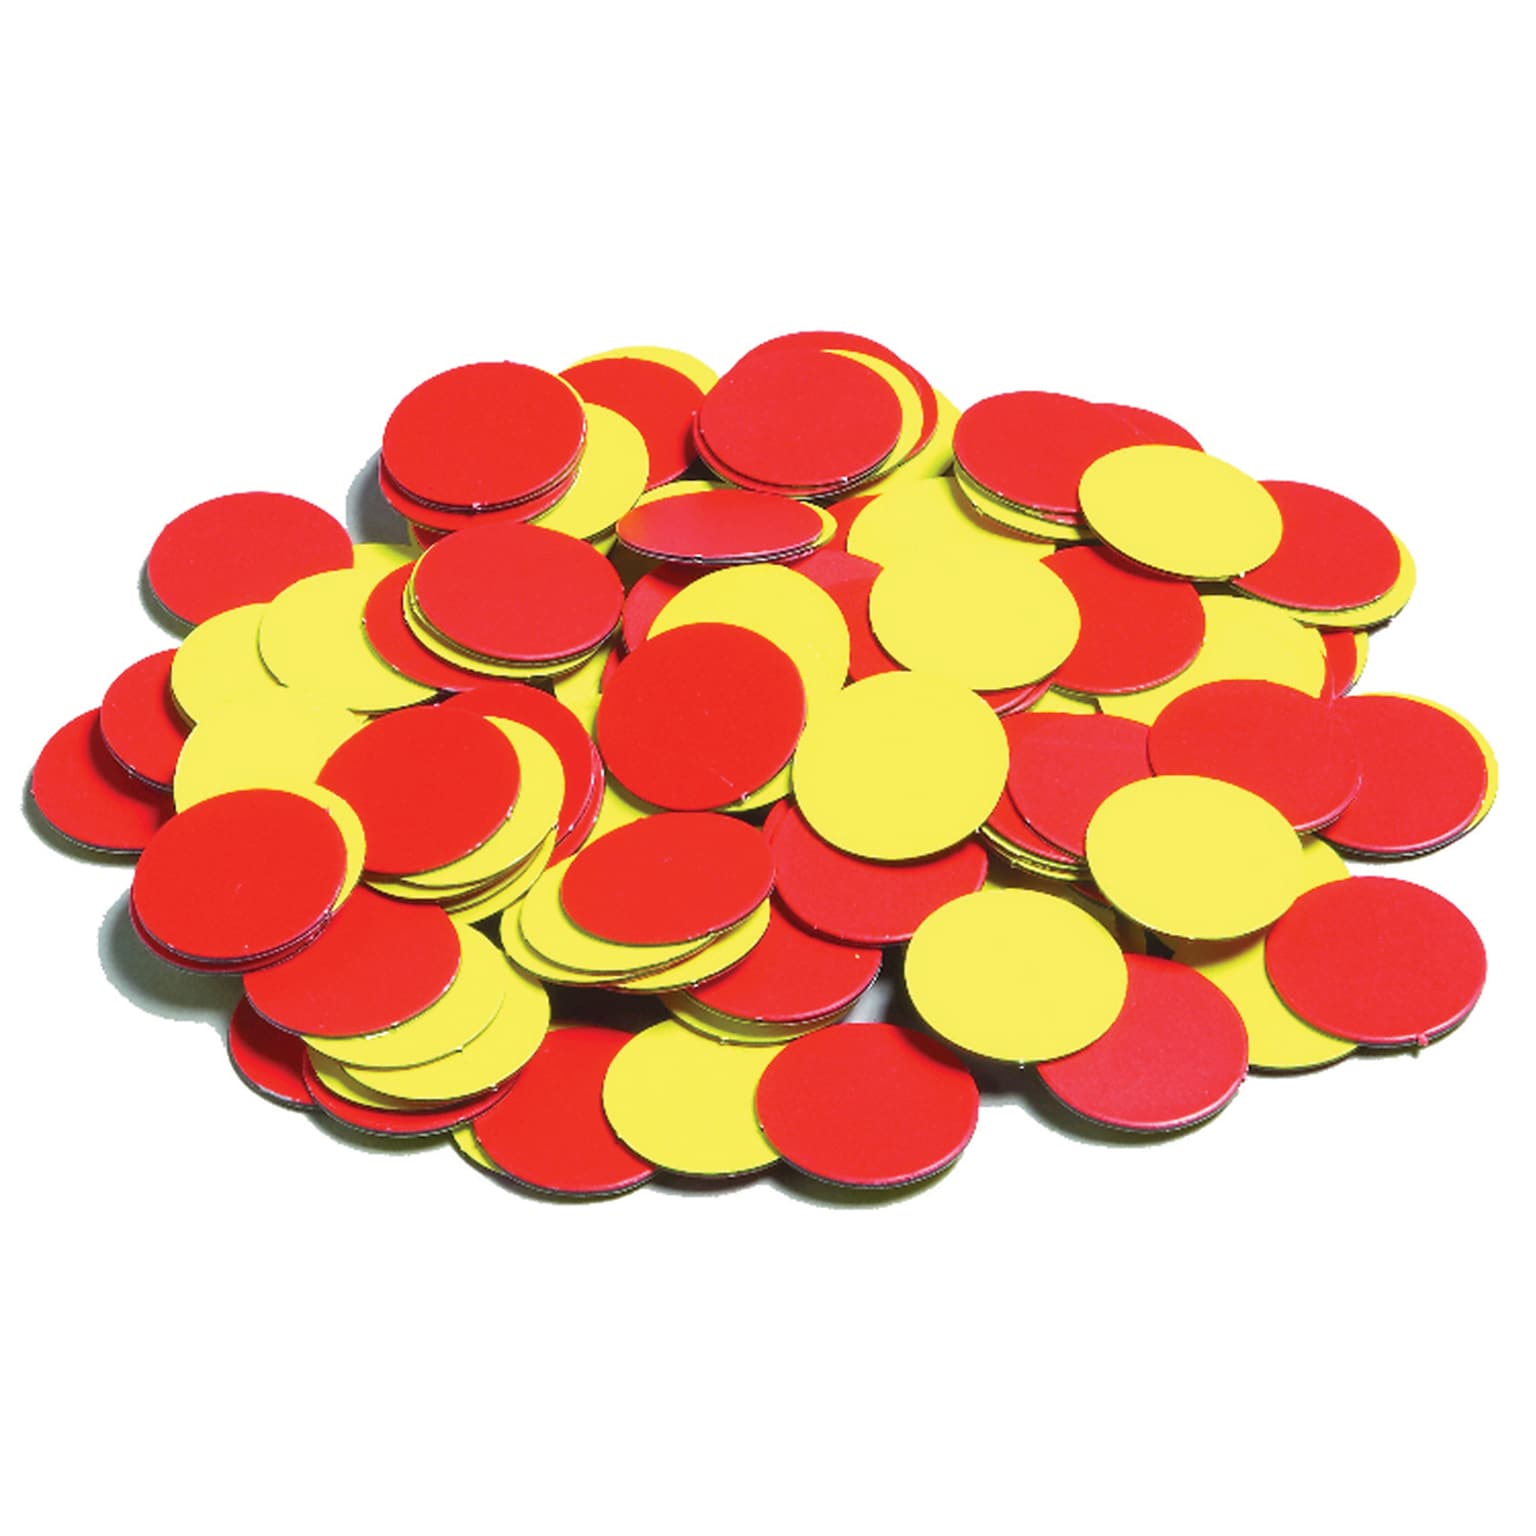 Learning Advantage™ Magnetic Two-Color Counters Manipulatives Set, Set of 200, 144/ST, 3 ST/BD